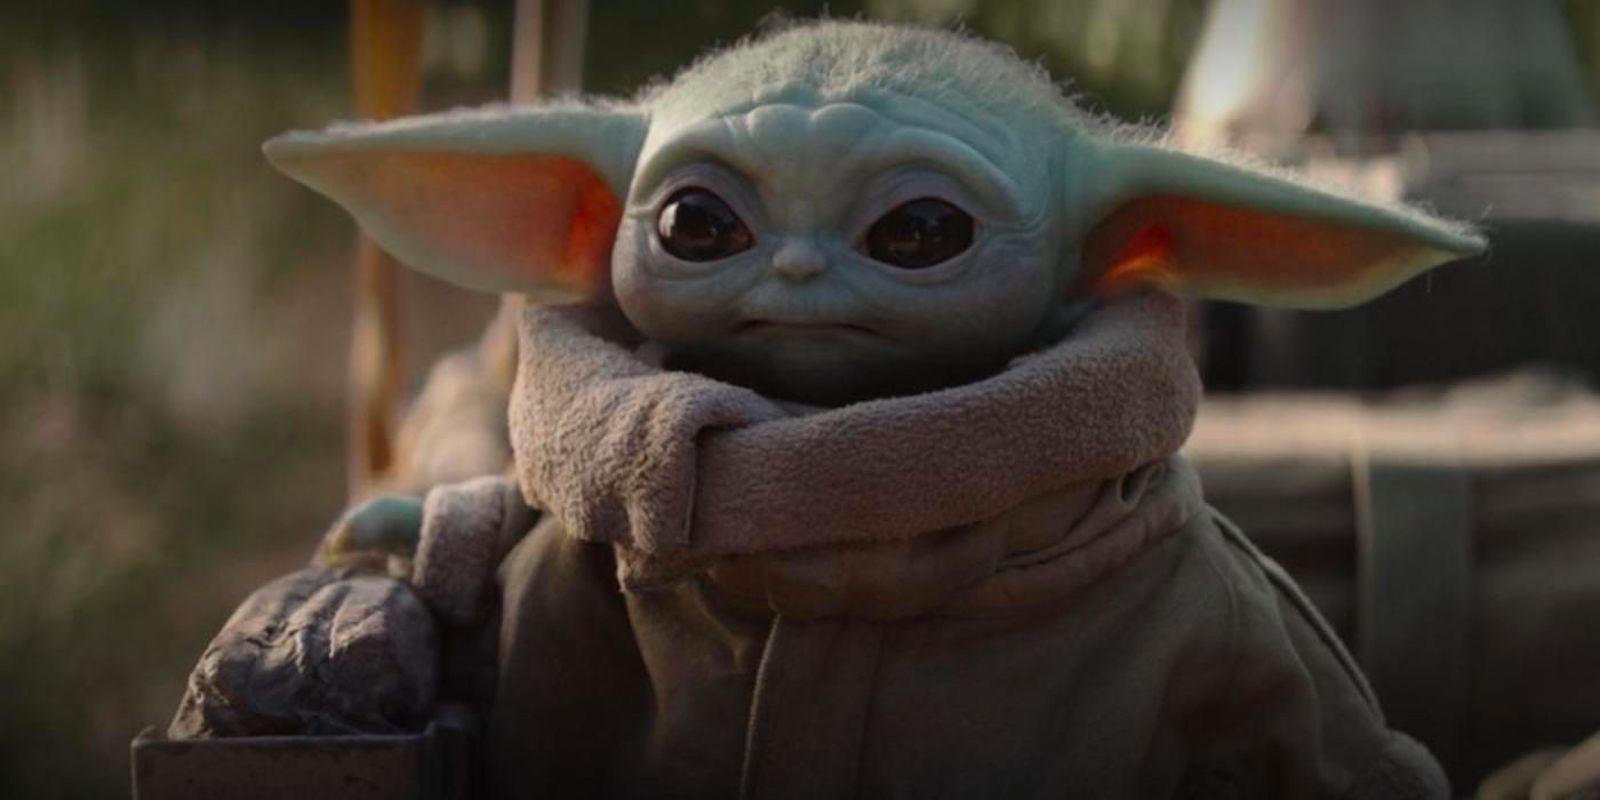 Best Baby Yoda Merch: 64 Adorable Must Have Baby Yoda Gifts!